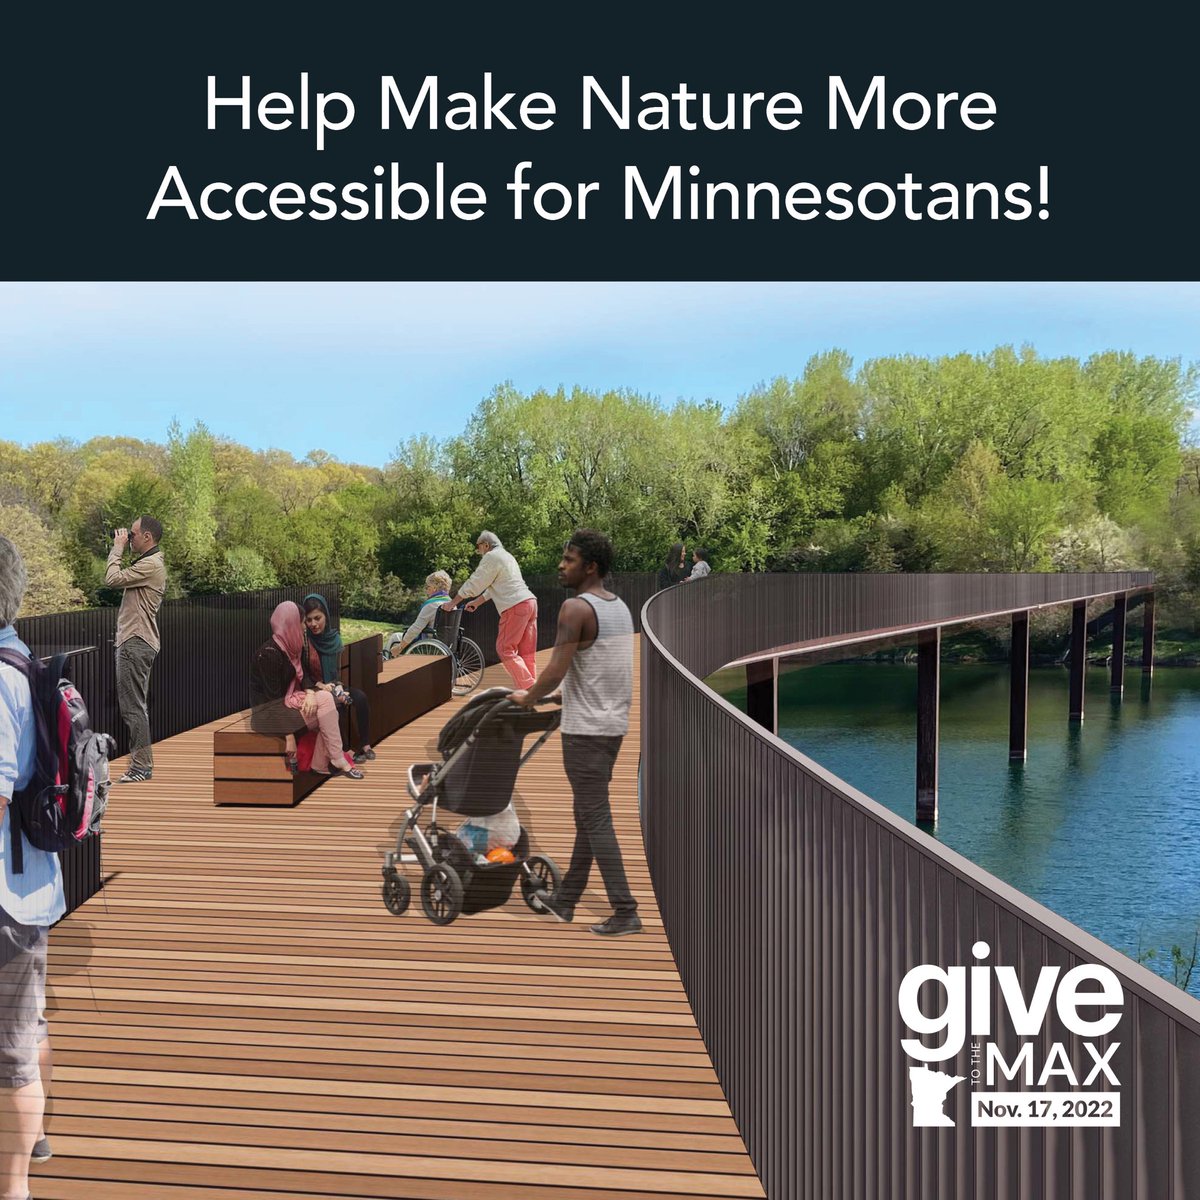 On MN’s biggest day of generosity, you can help more Minnesotans access the natural world. You’ll support accessibility at the #MNZoo and help bring forth new projects like the Treetop Trail, you'll connect people with nature and wildlife. bit.ly/3Dd4JqD #GTMD22 #MNZoo